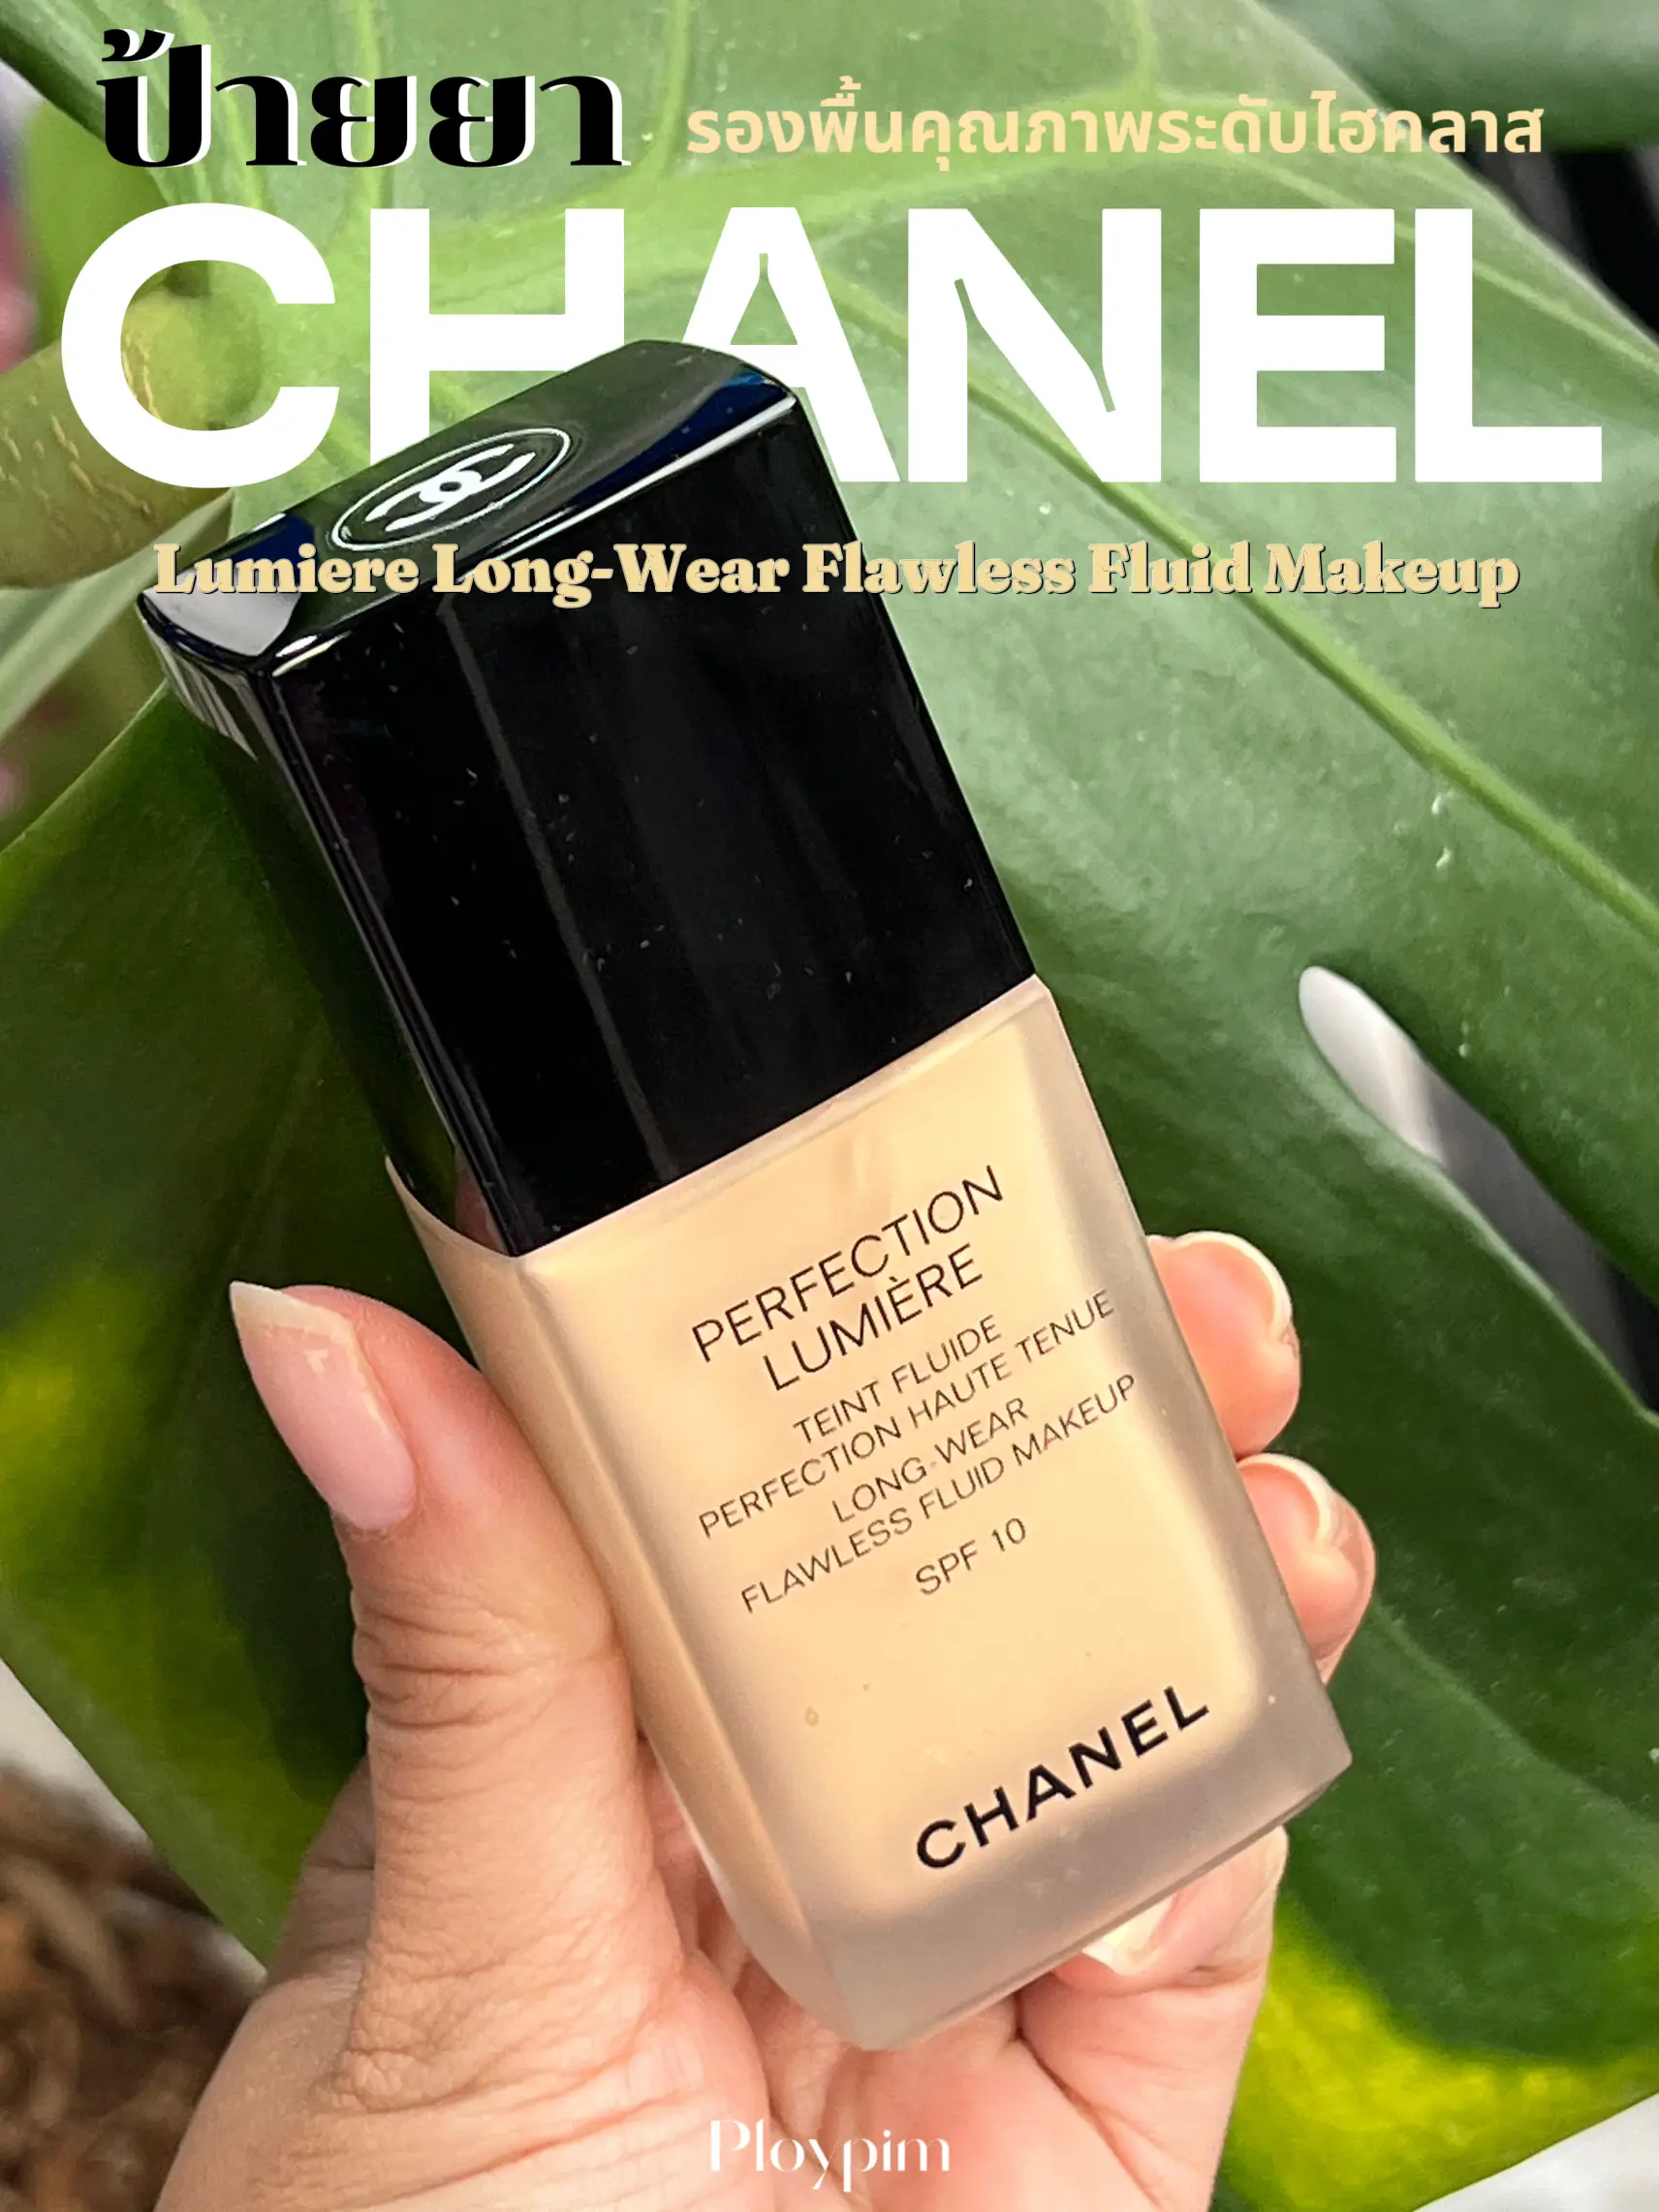 High Class Quality Foundation Medicine Sign from Chanel